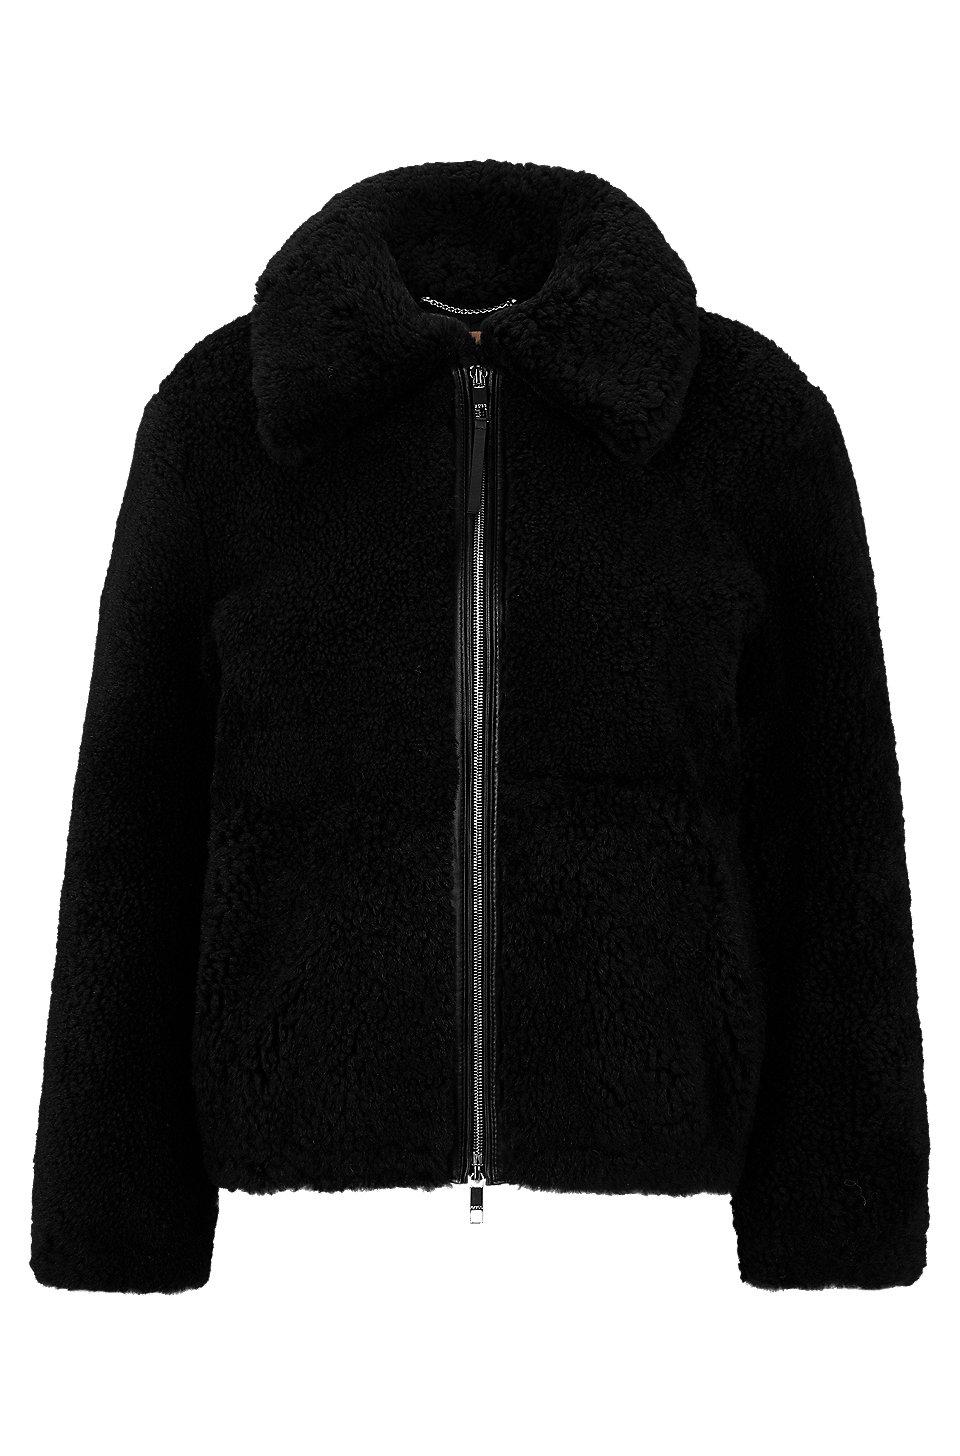 BOSS - Regular-fit zip-up jacket in curly shearling